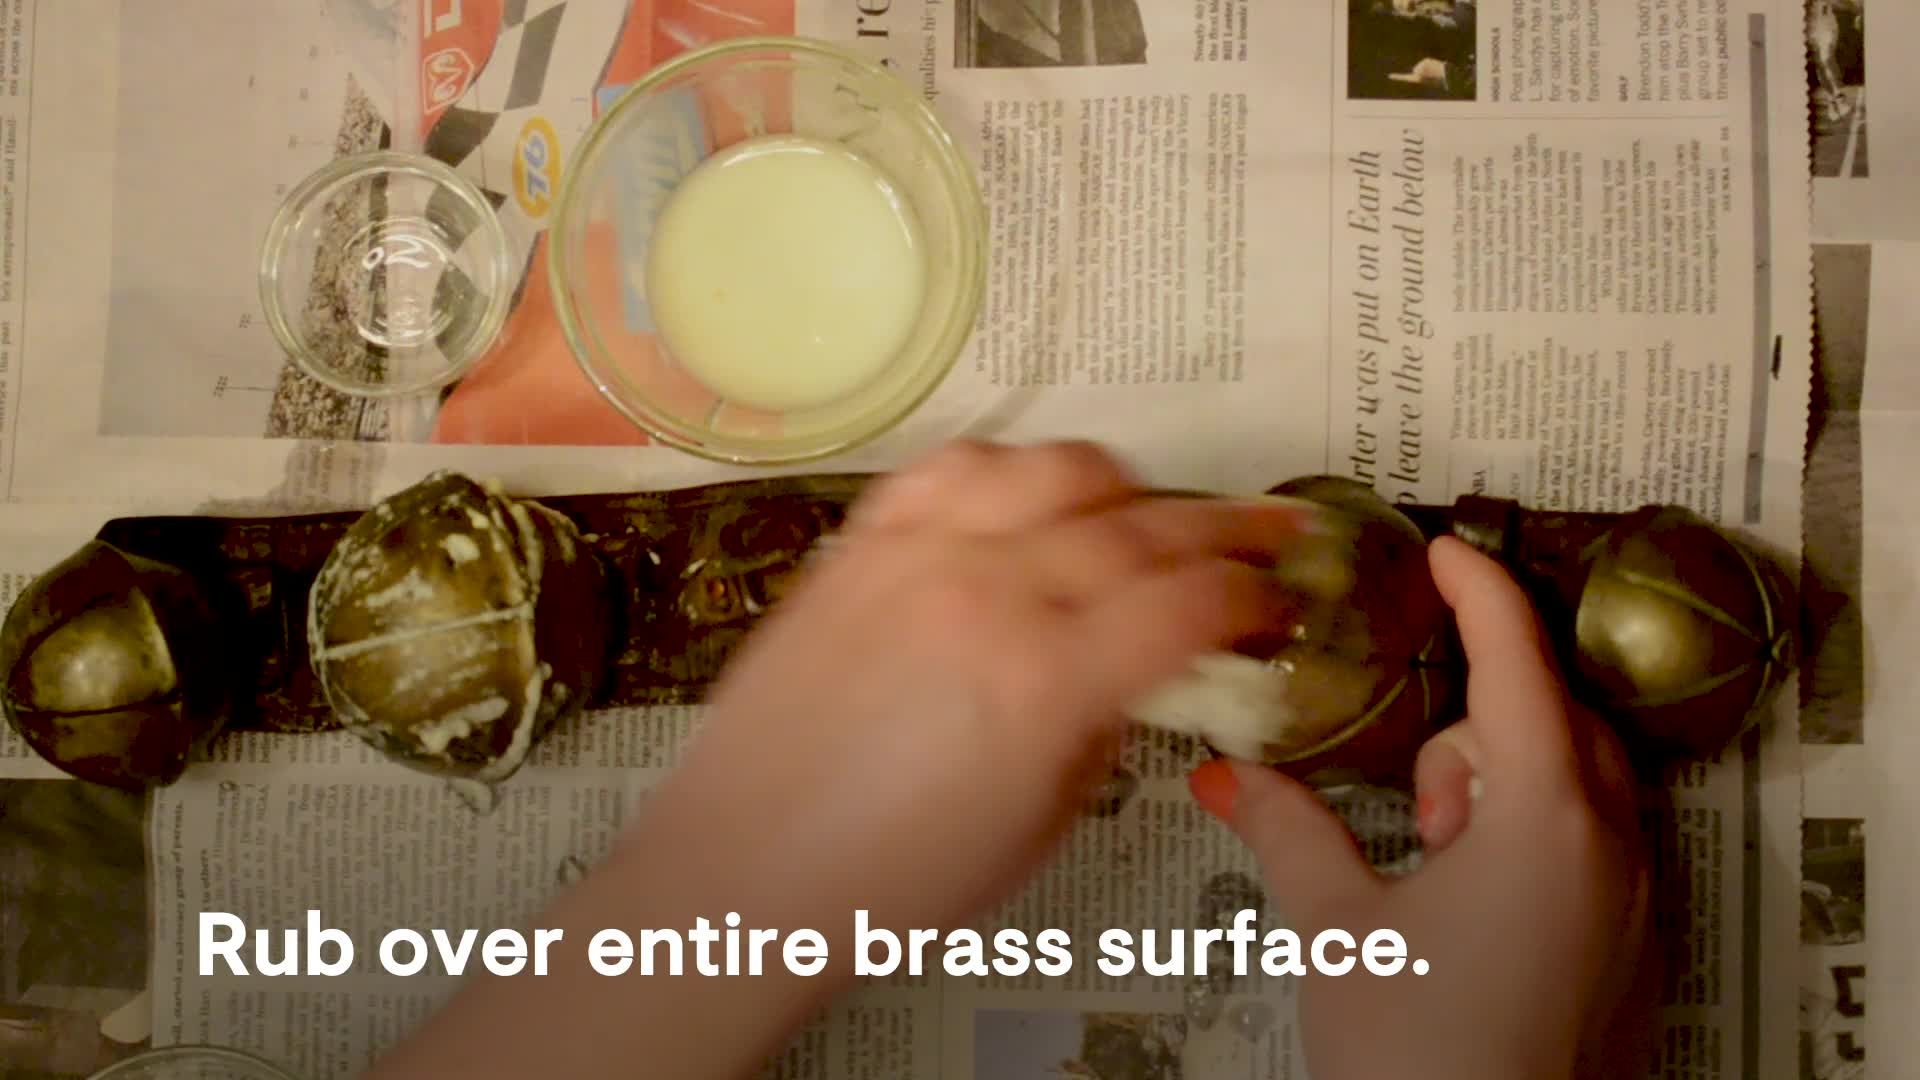 8 easy ways to clean brass like a pro